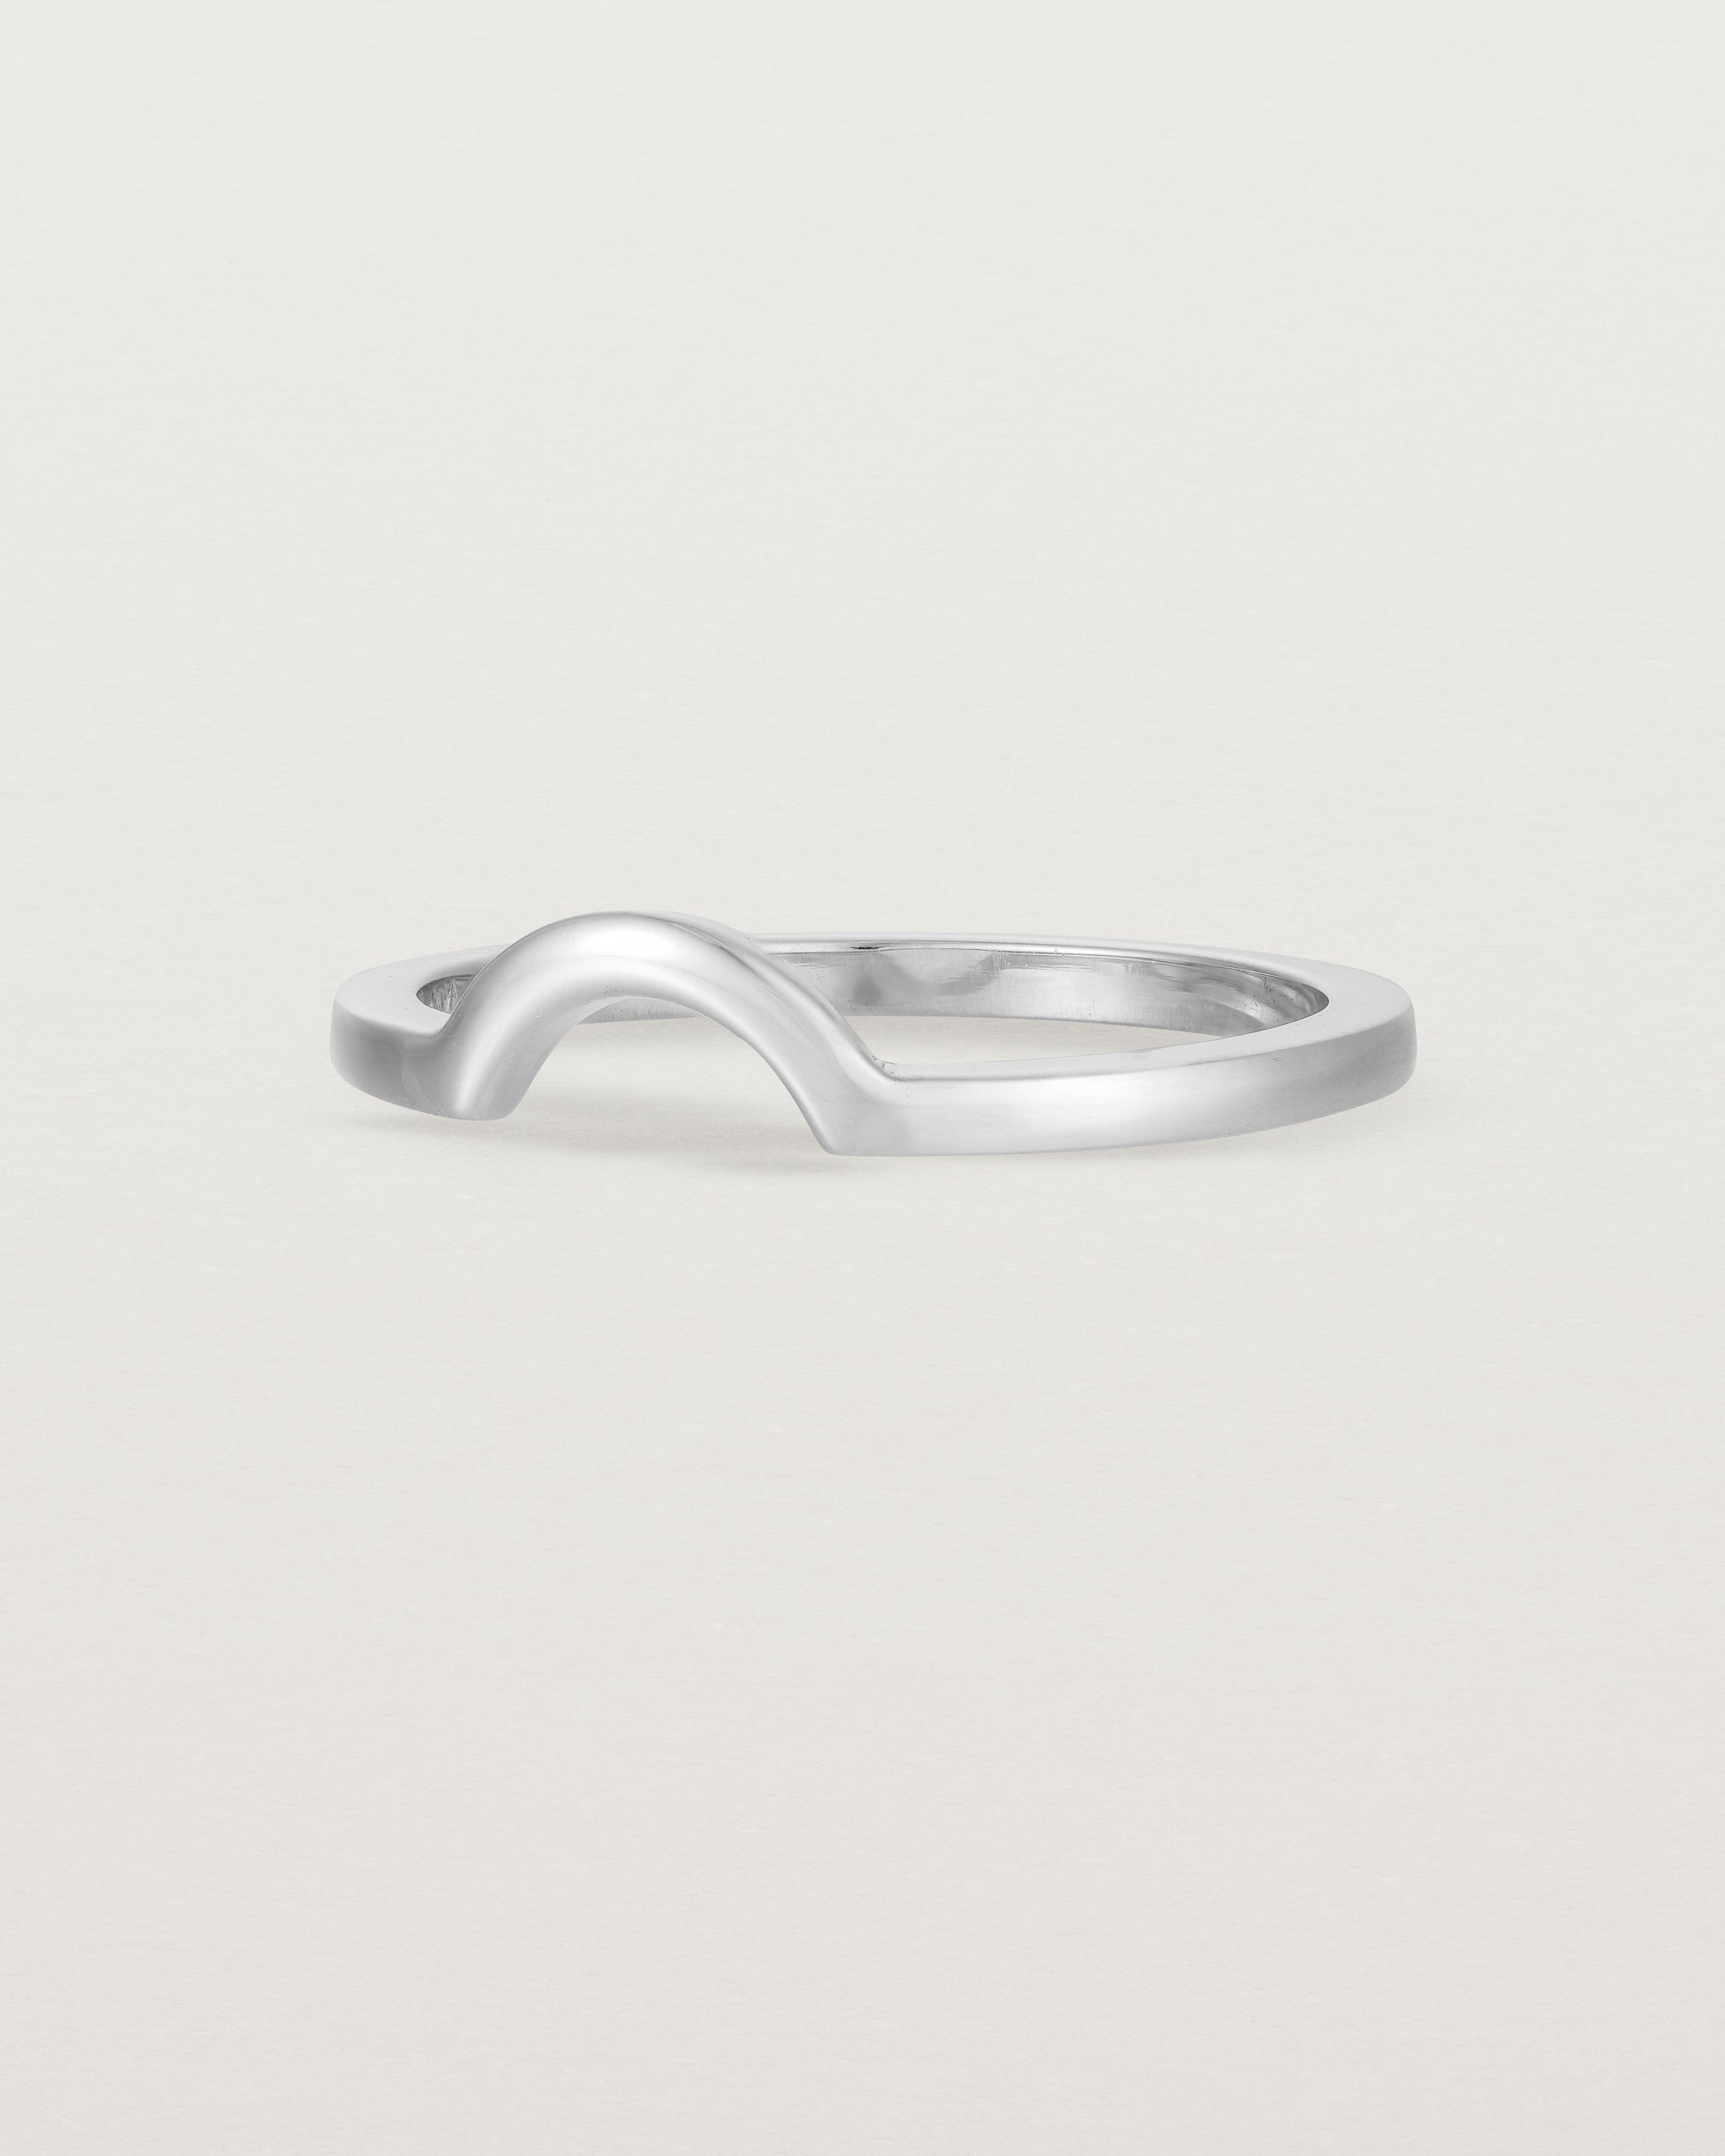 A classic small arc crown ring crafted in white gold